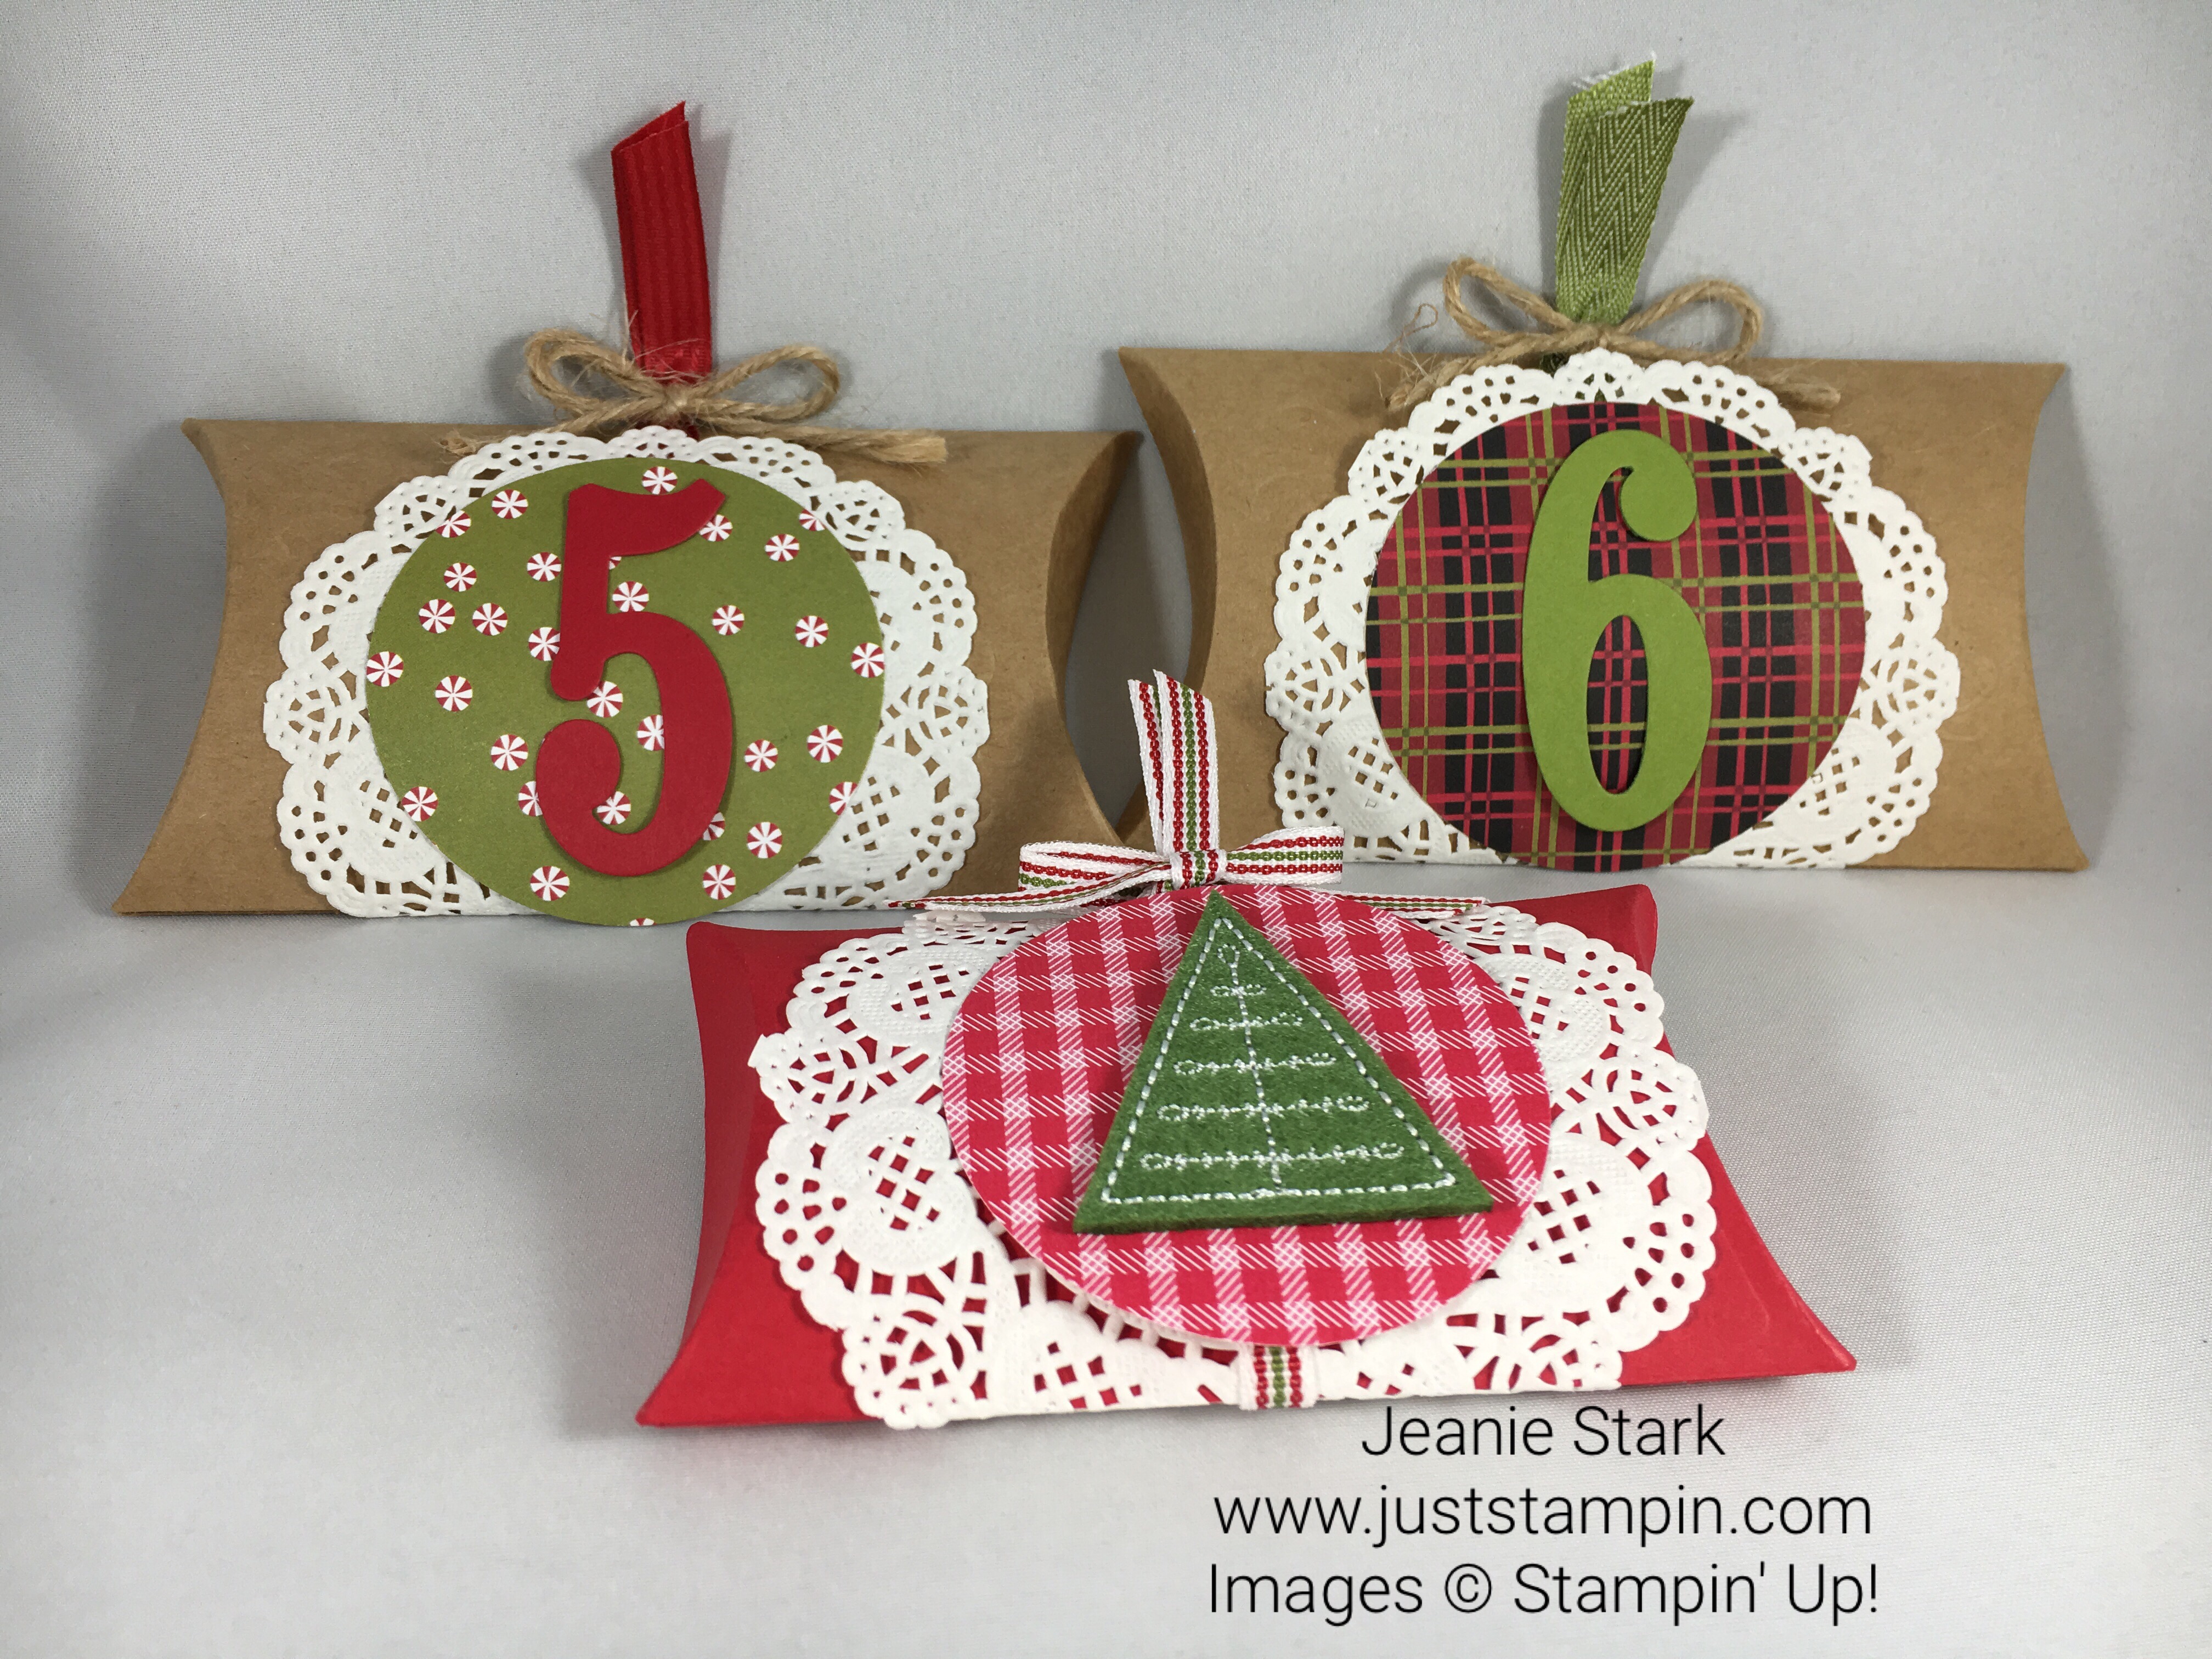 Stampin Up Paper Pumpkin and Trim Your Stocking Pillow Box Ideas - Jeanie Stark StampinUp